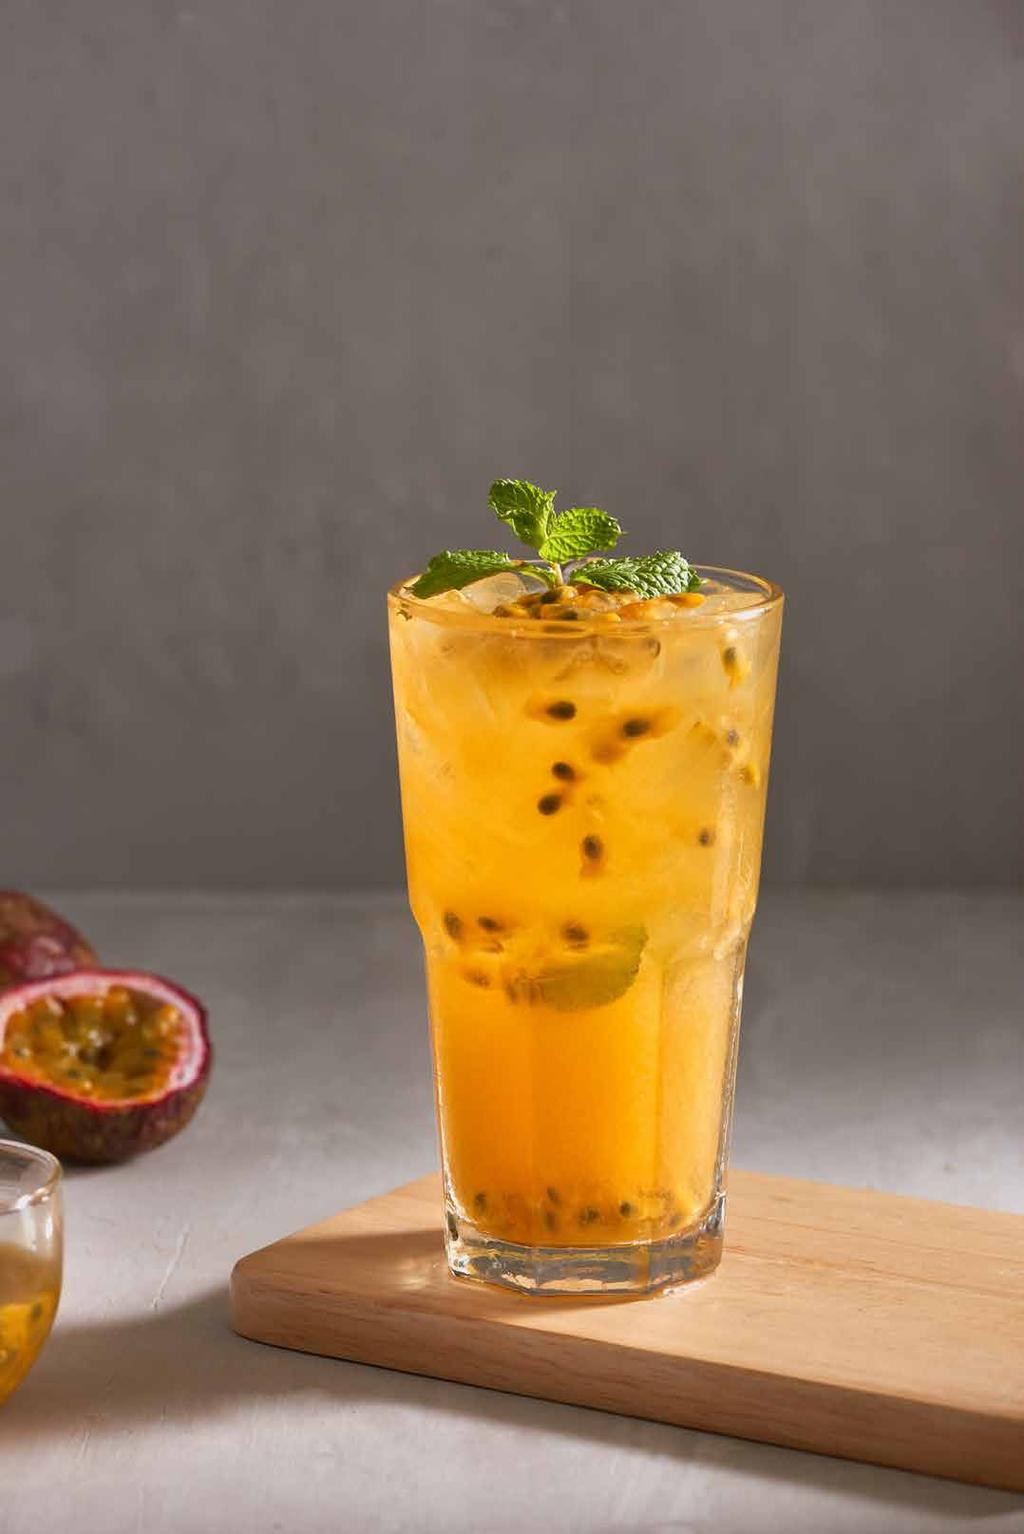 Exotic passionfruit and fresh lemon works brilliantly when combined with iced tea. Add a splash of pomegranate syrup to the glass to give your guests a true exotic and refreshing experience.